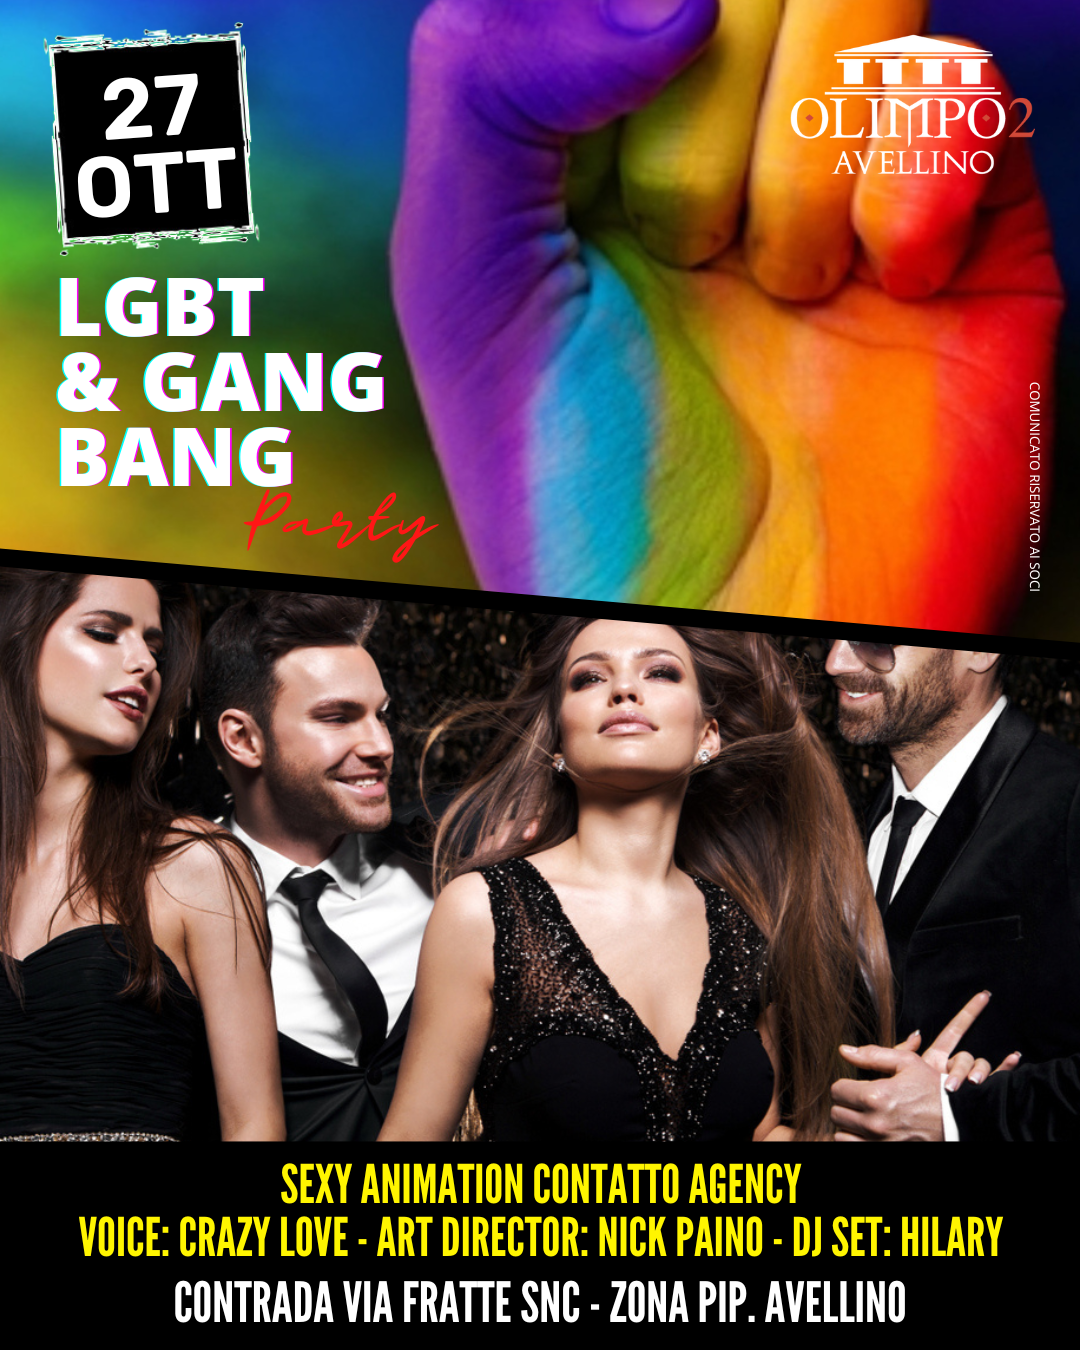 lgbt gang party olimpo 2 avellino